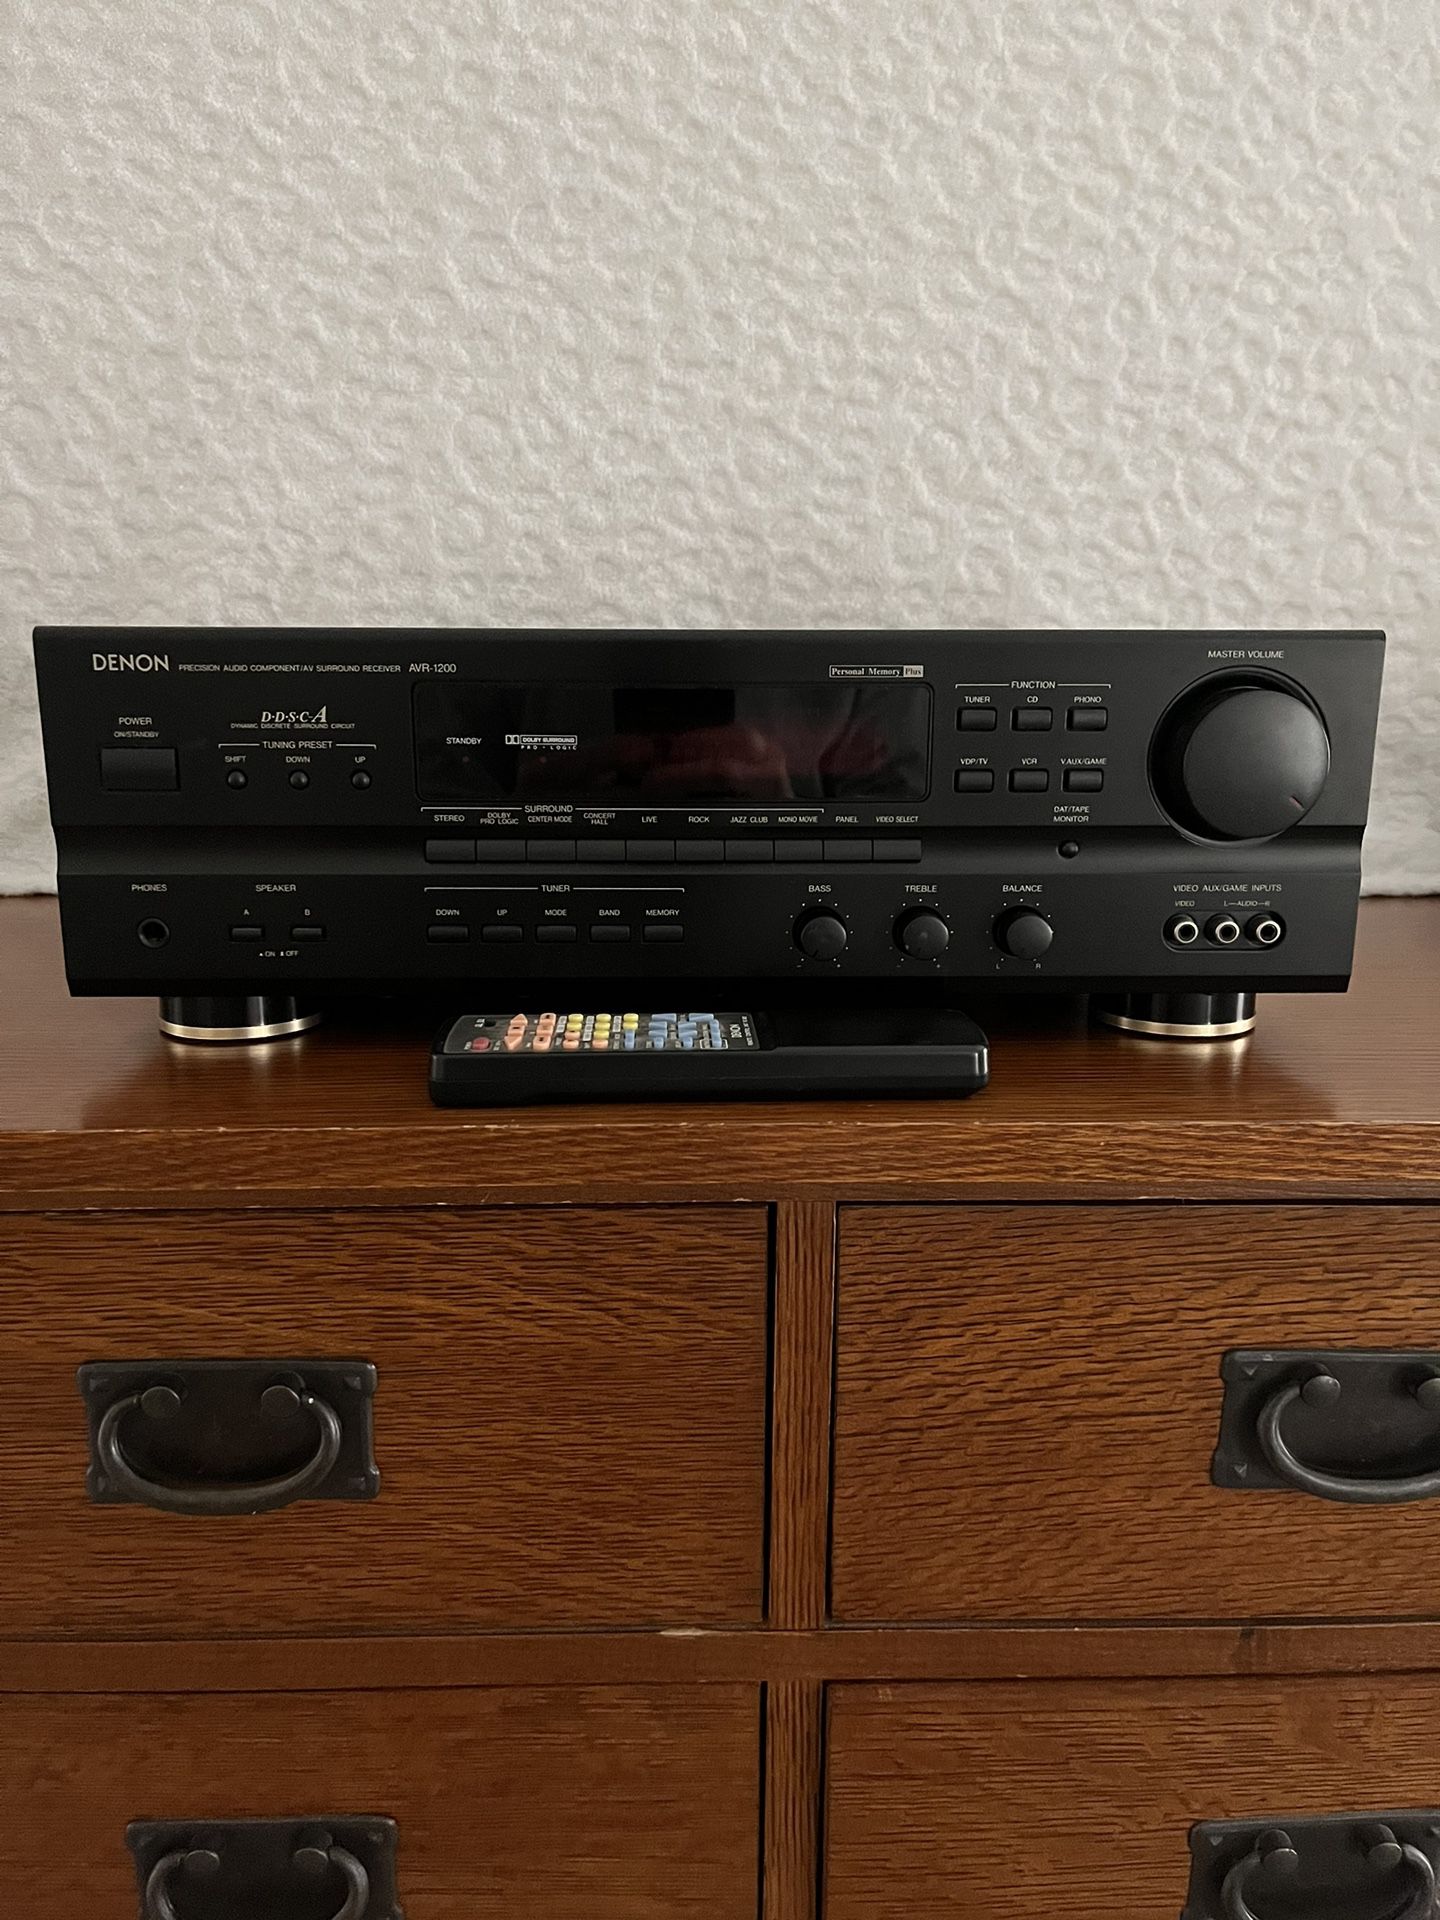 Denon Receiver W/ Multi Disc CD player and 6 Speaker Arrangement  Home Theater Speakers